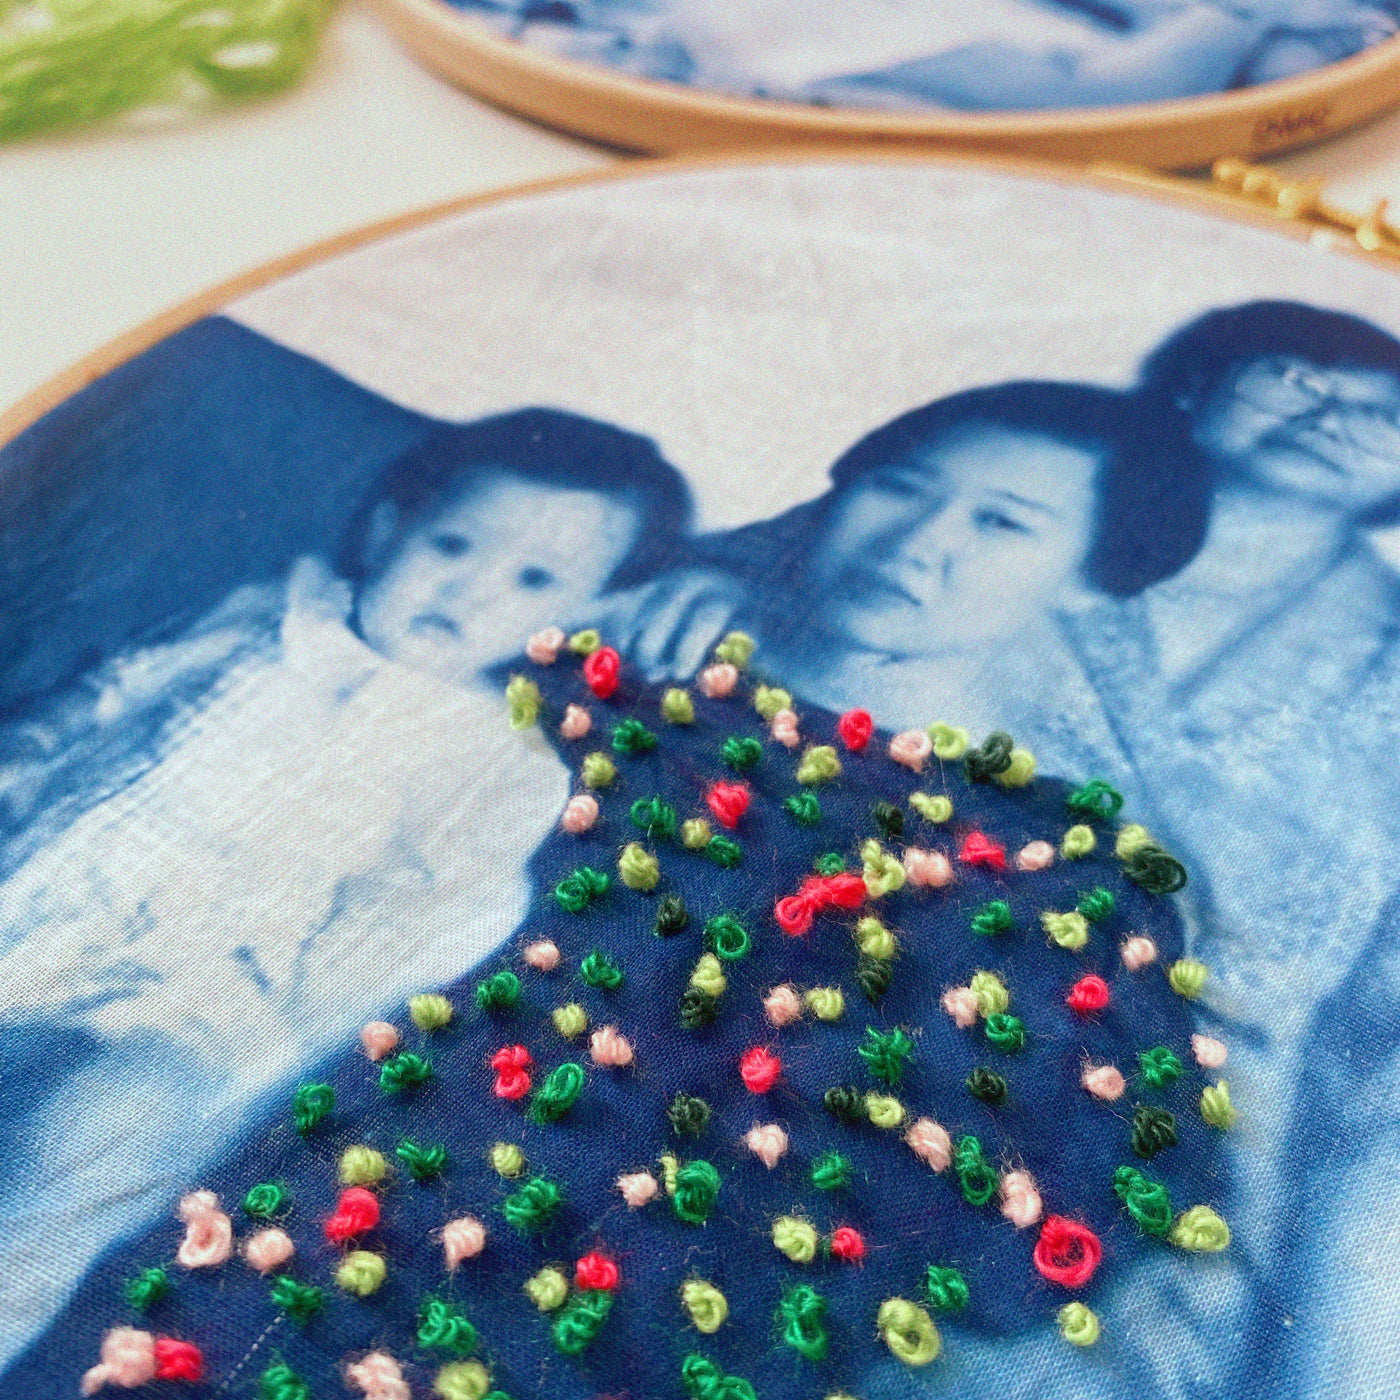 Photo-Embroidery Workshop with Co-Creation & CrazyCat